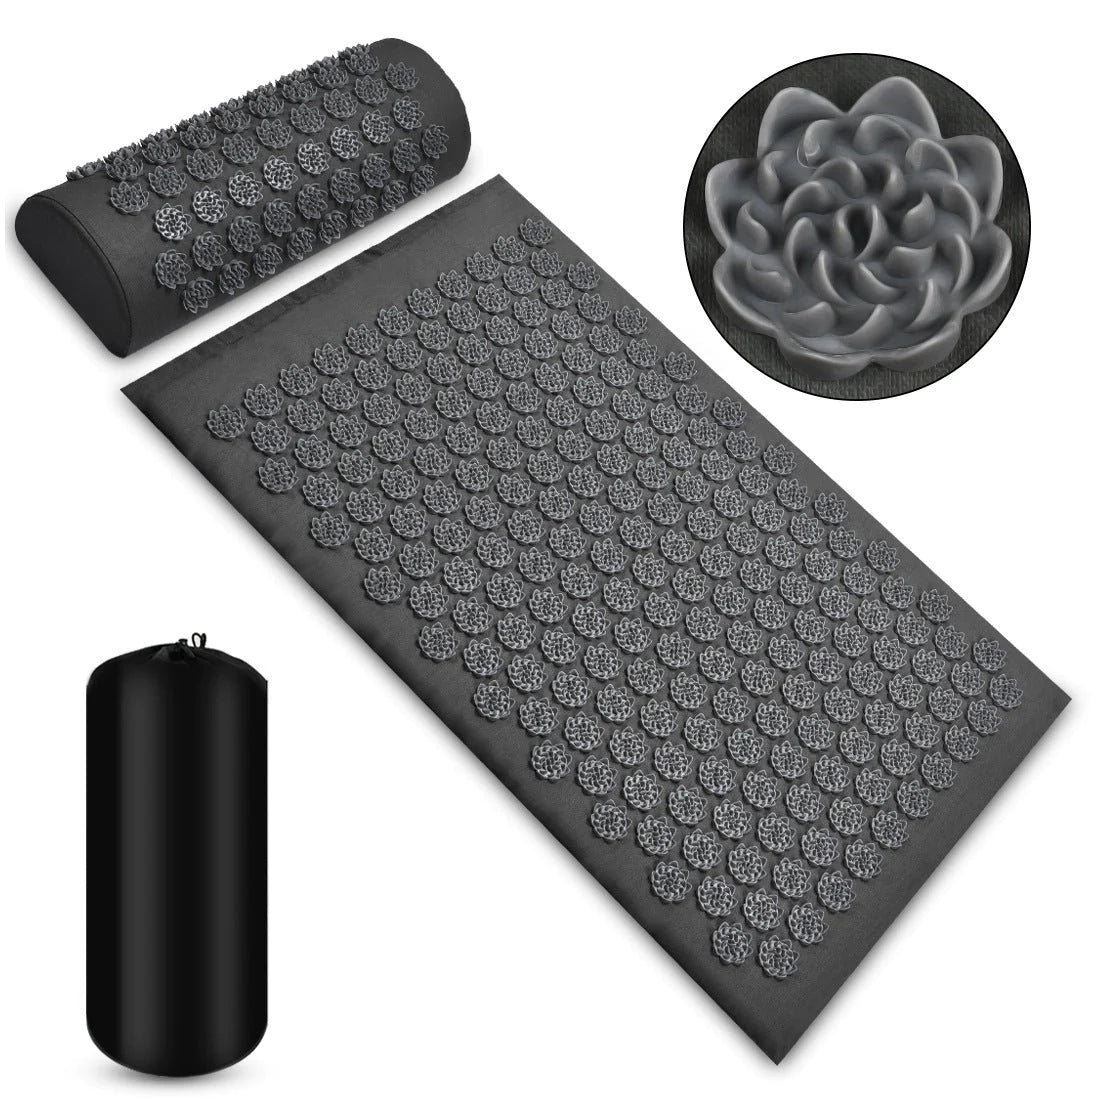 Lotus Yoga Mat with Acupressure Therapy